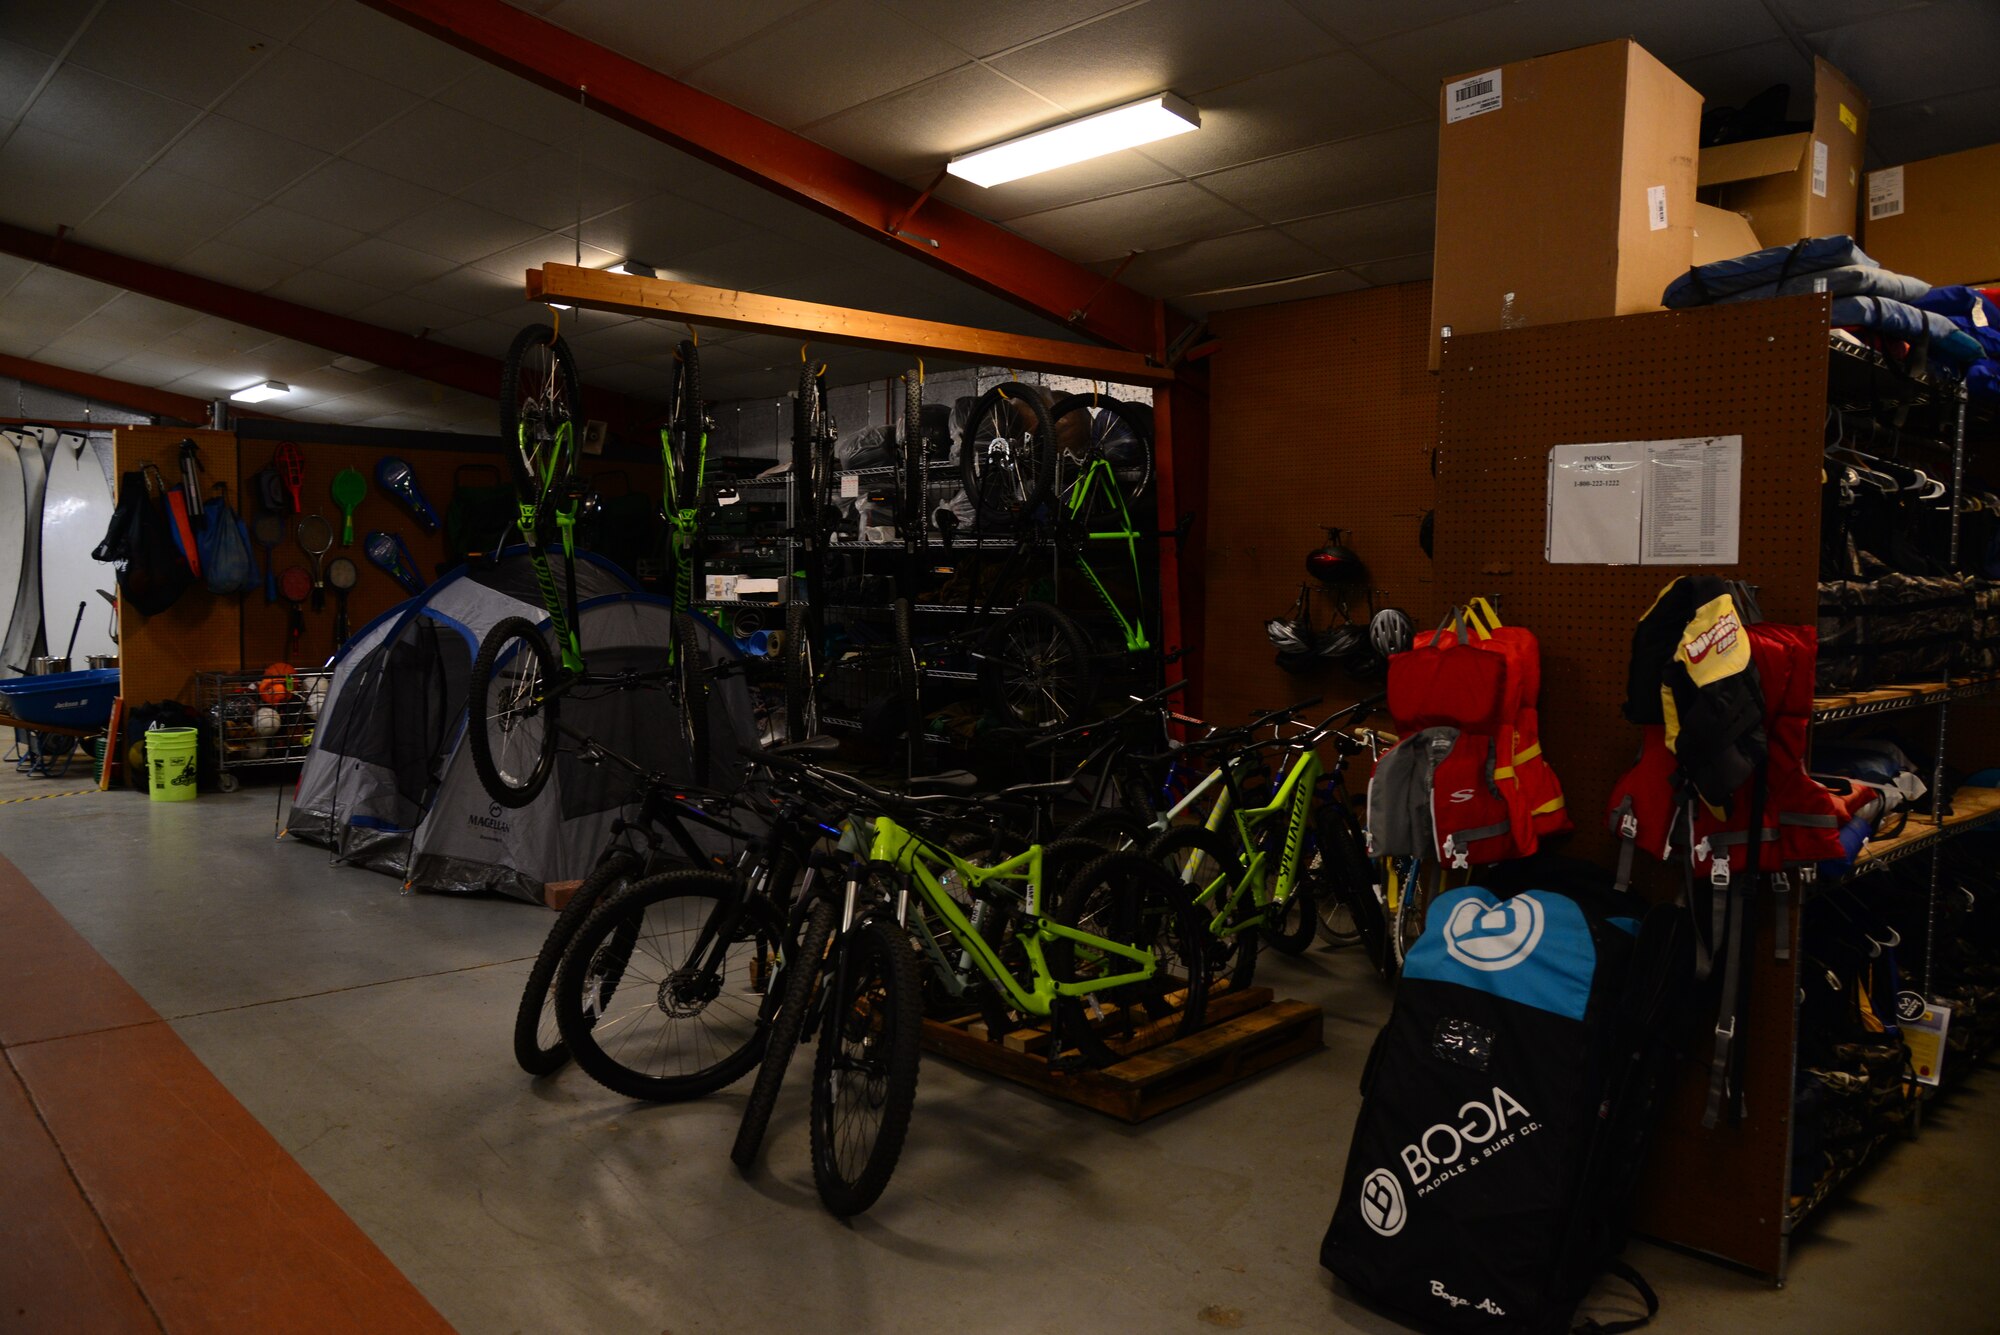 The 14th Force Support Squadron’s Outdoor Recreation has bikes, recreational games and other equipment for rent. (U.S. Air Force photo by Airman 1st Class Beaux Hebert)